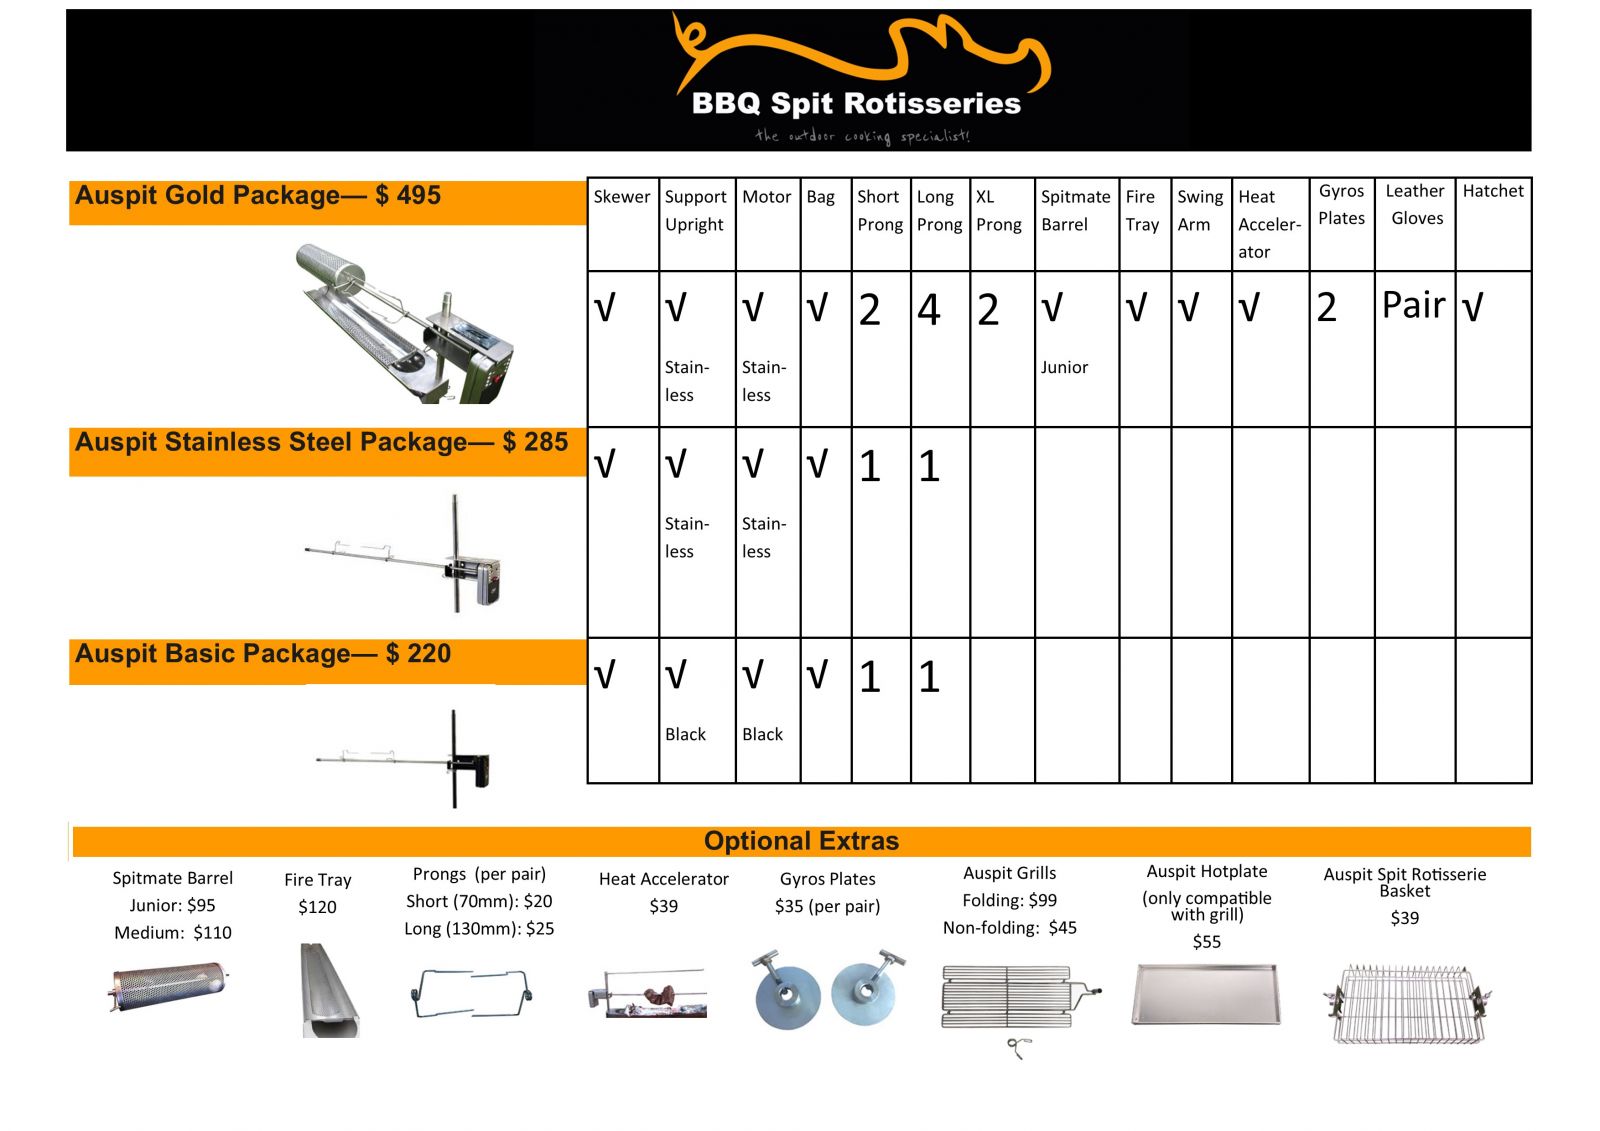 This image shows a comparison chart for what is included in each of the auspit Compact Portable Camping Spit Rotisserie Package